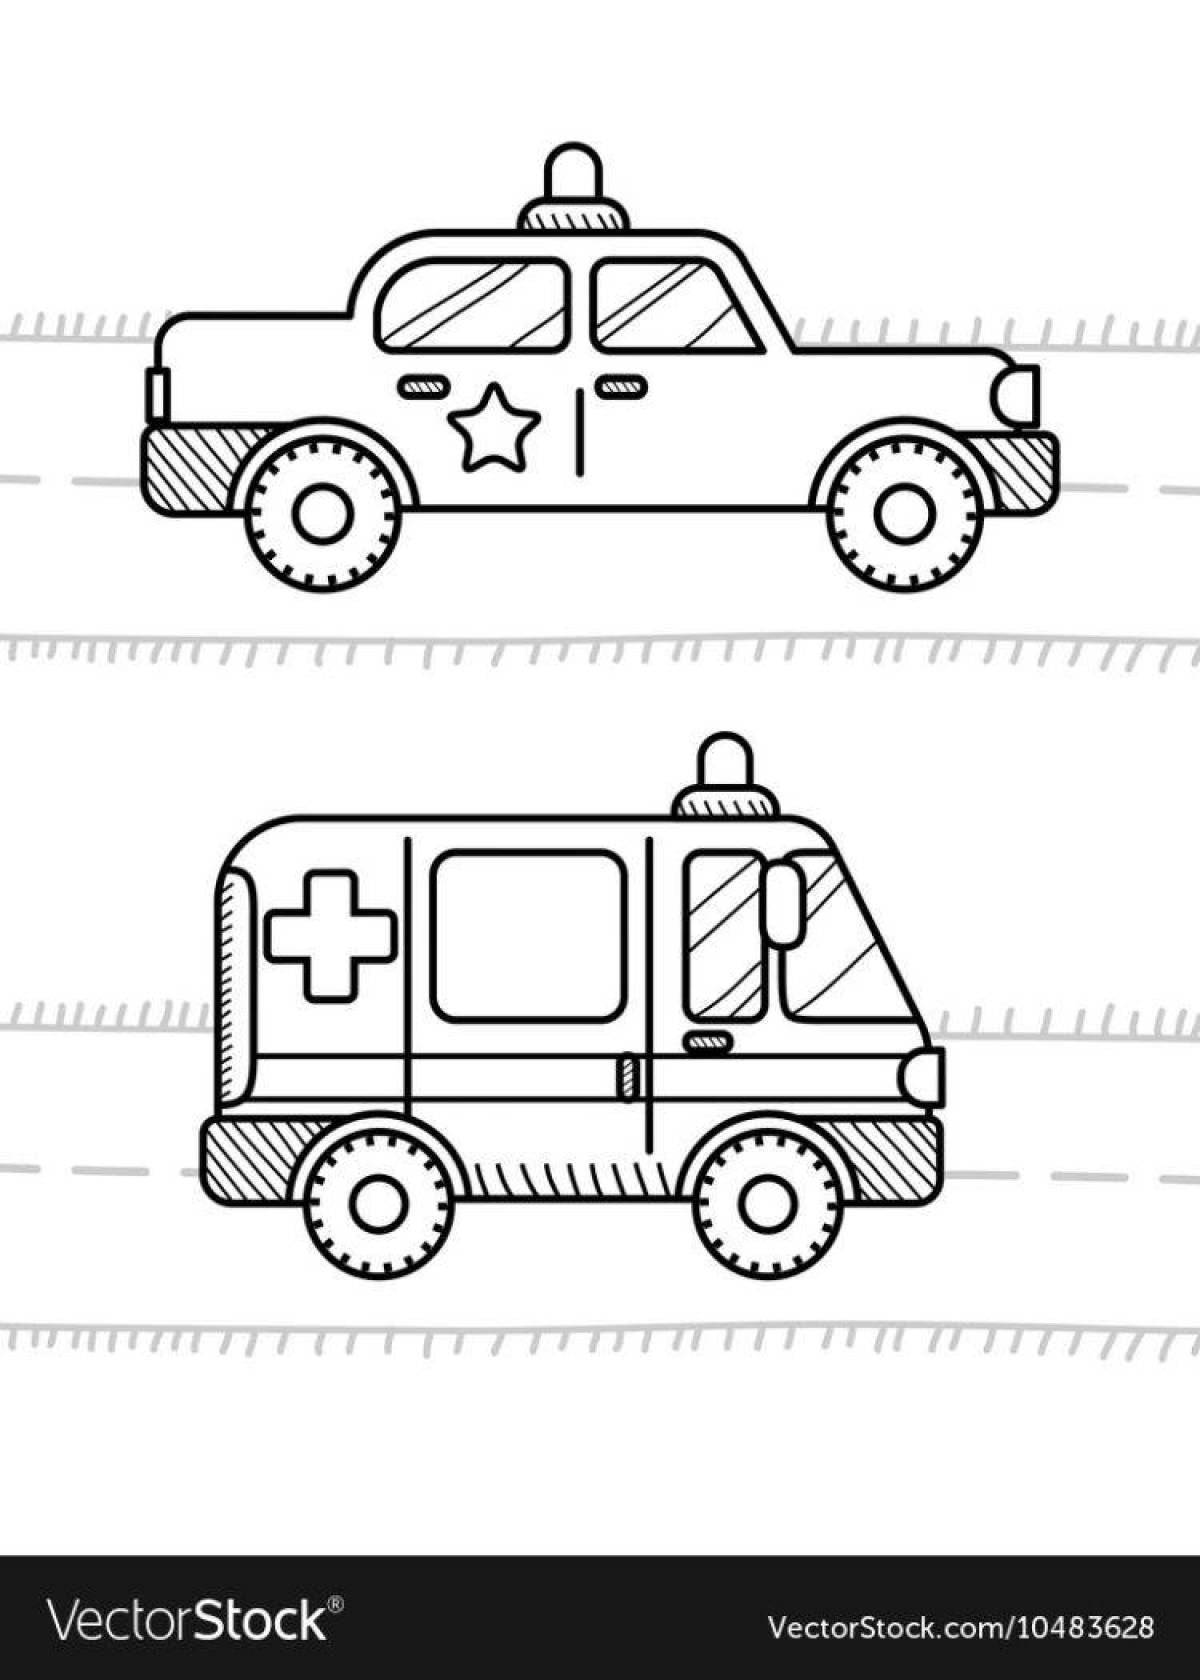 Special Purpose Vehicles Playful Coloring Page